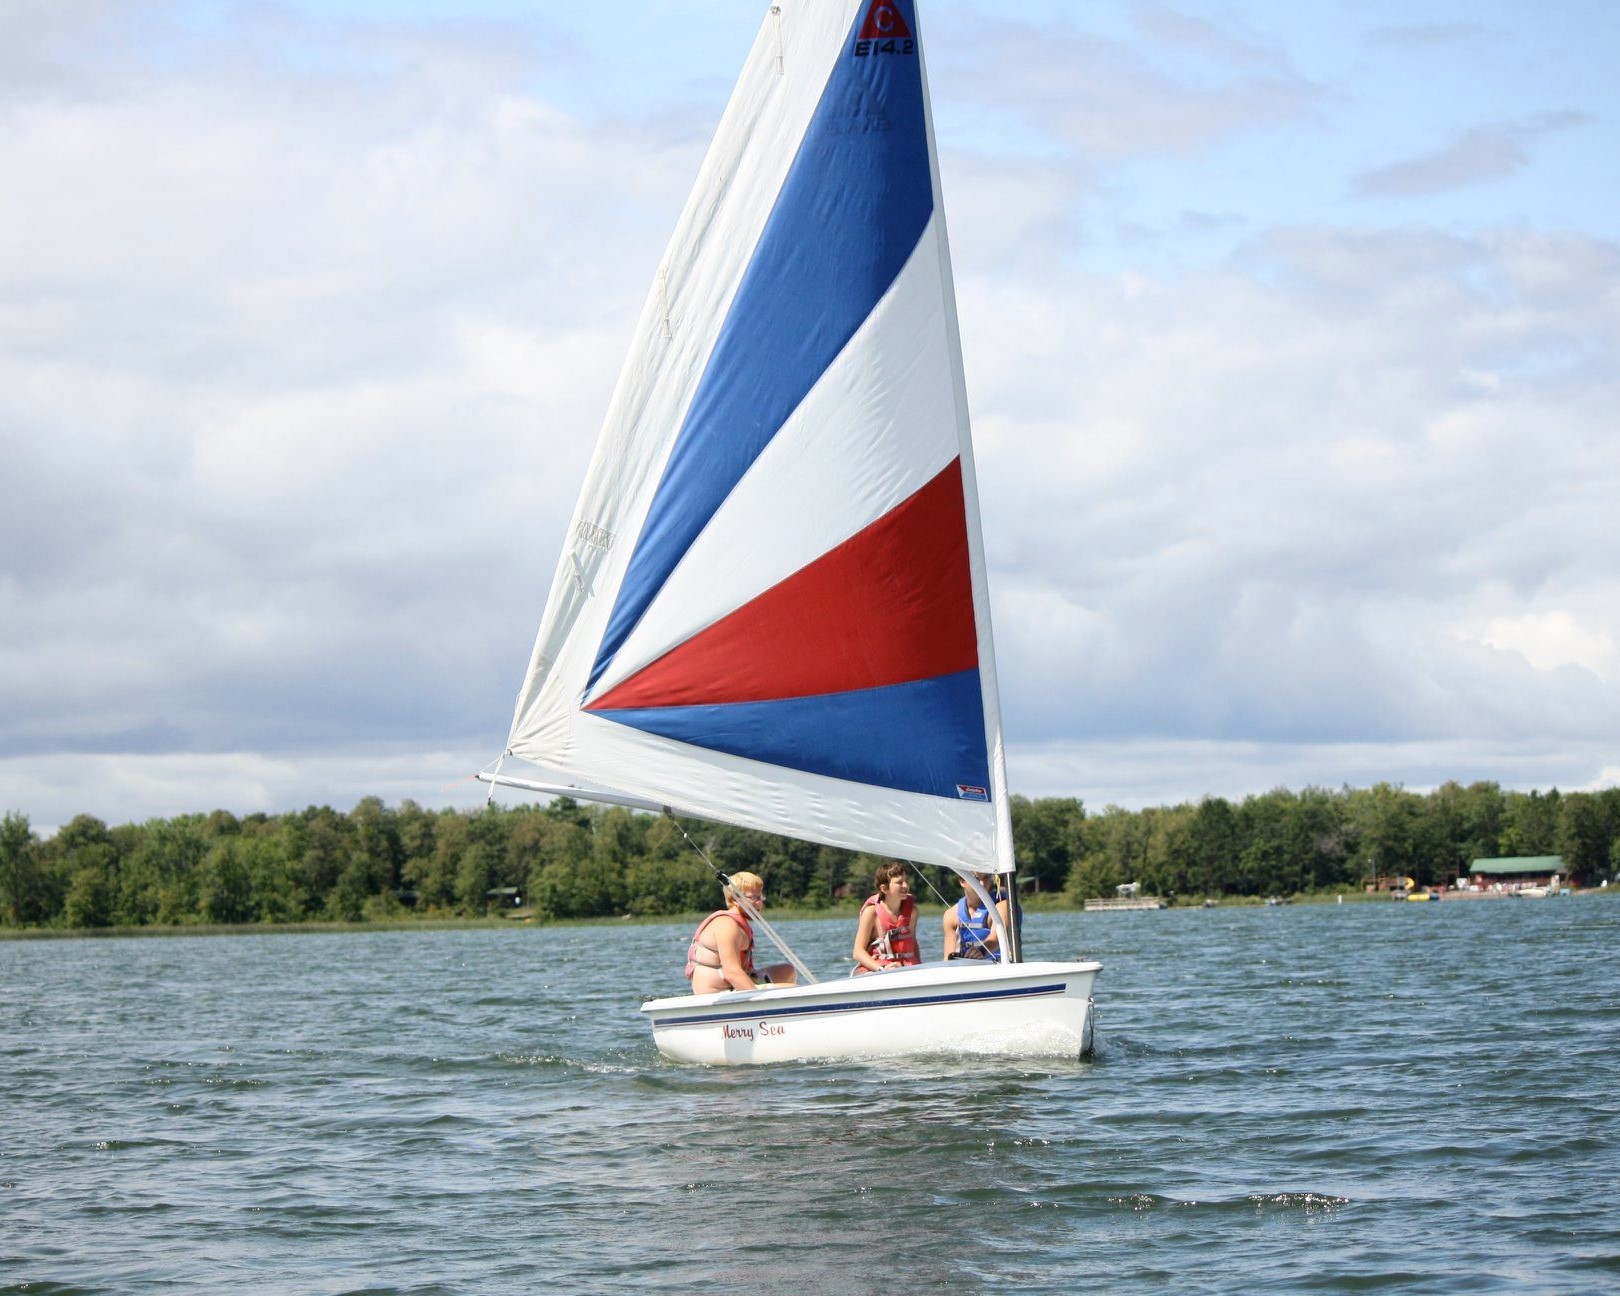 Three Scouts on a large sailboat on the lake